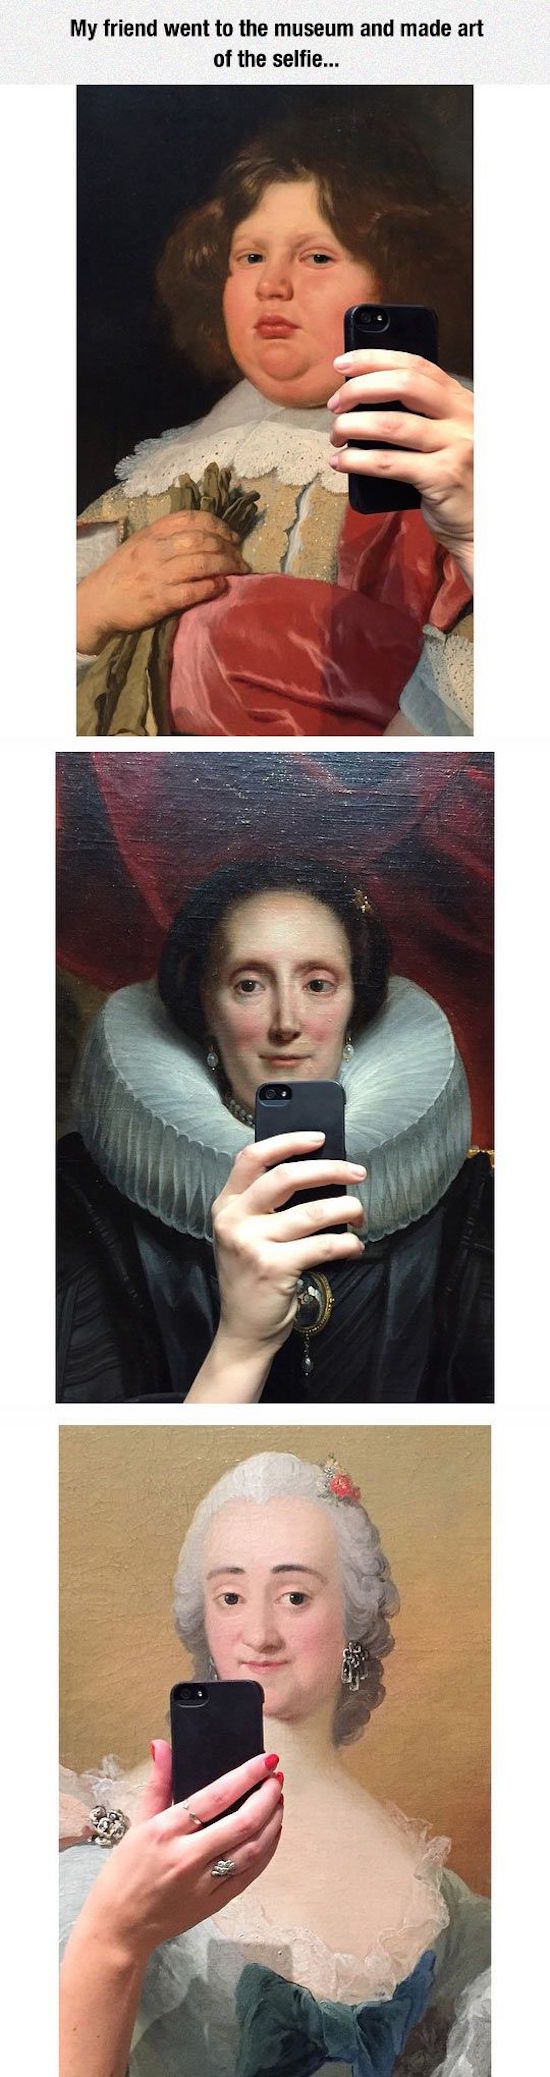 funny pictures of museum art selfies